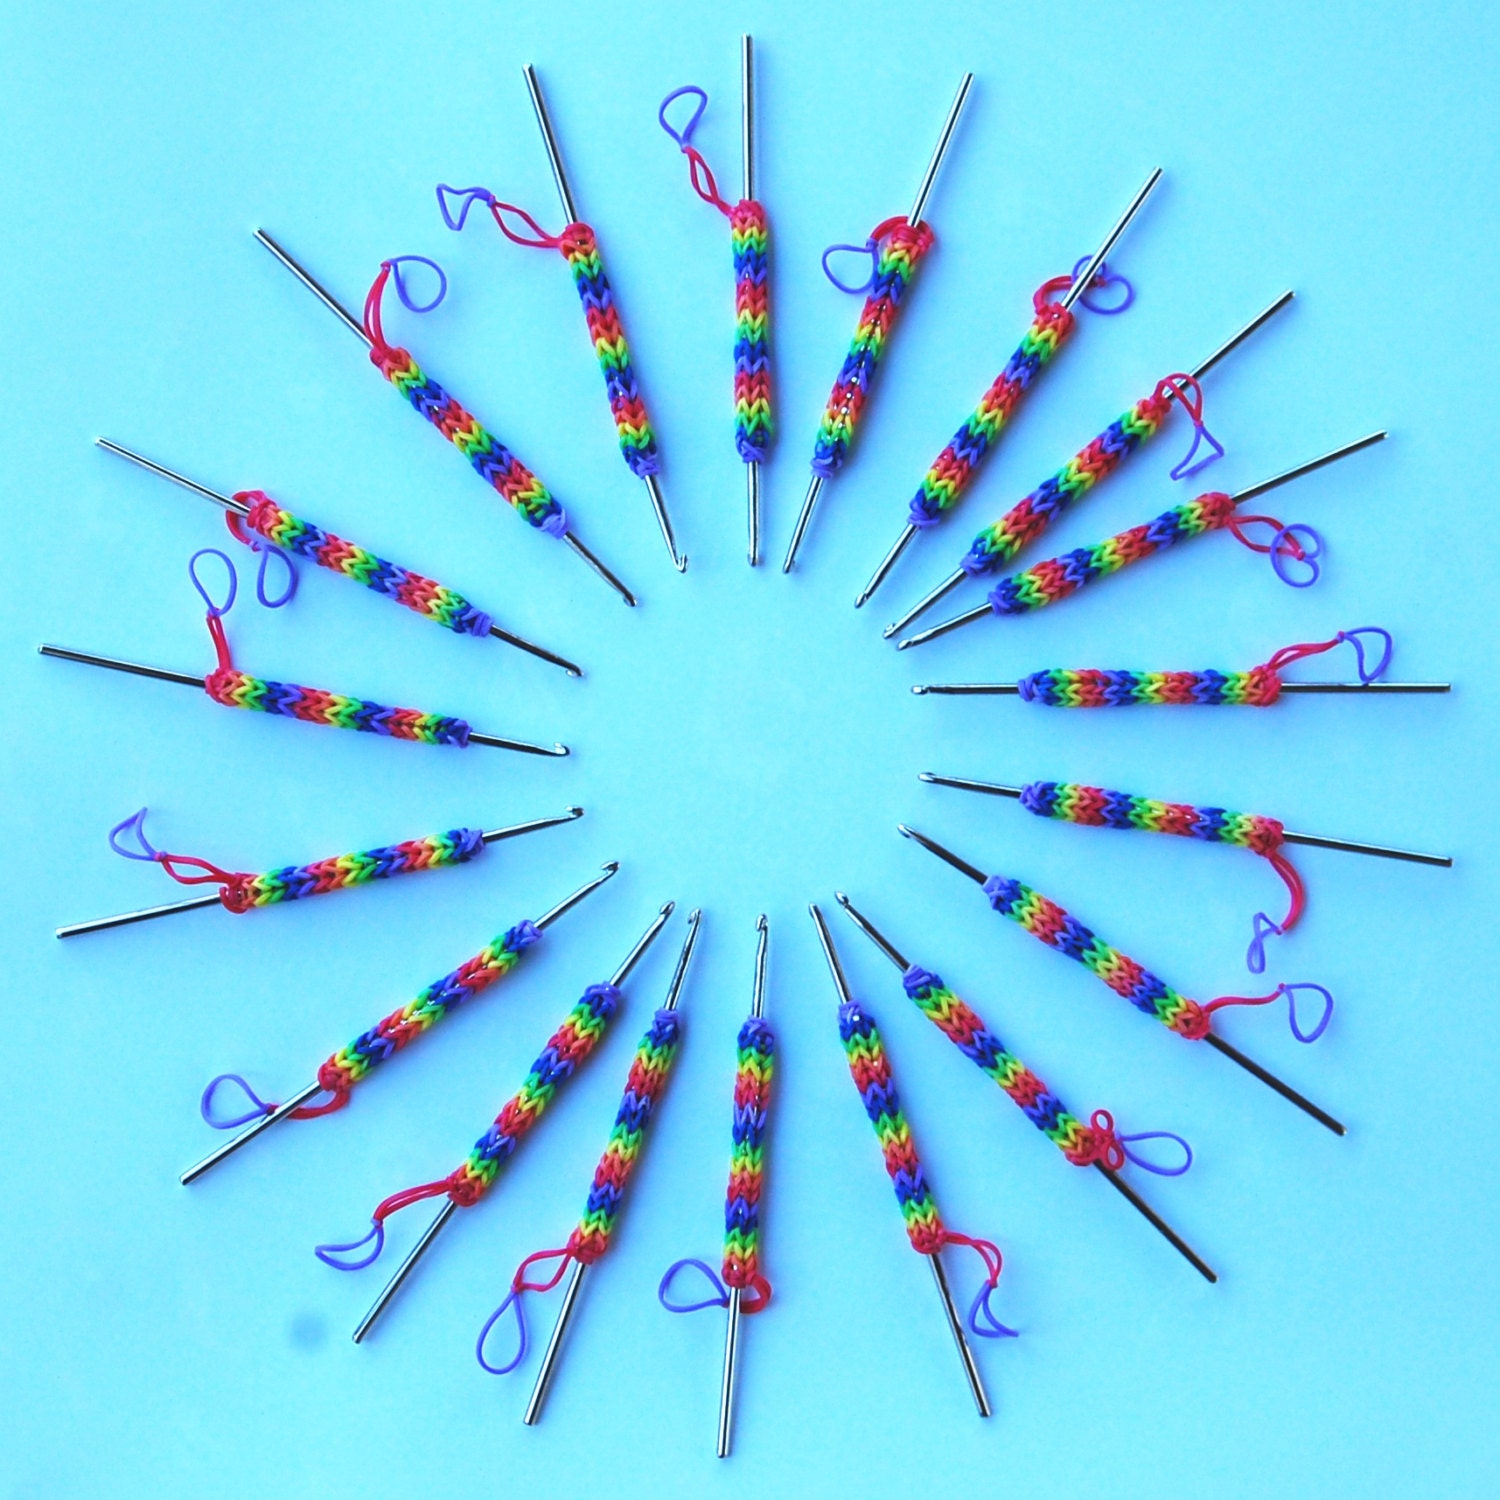 Rainbow Loom Metal Crochet Steel Hook Tool Replacement Authentic Bands  Comfort Grip Gift FREE Shipping to the USA -  Denmark